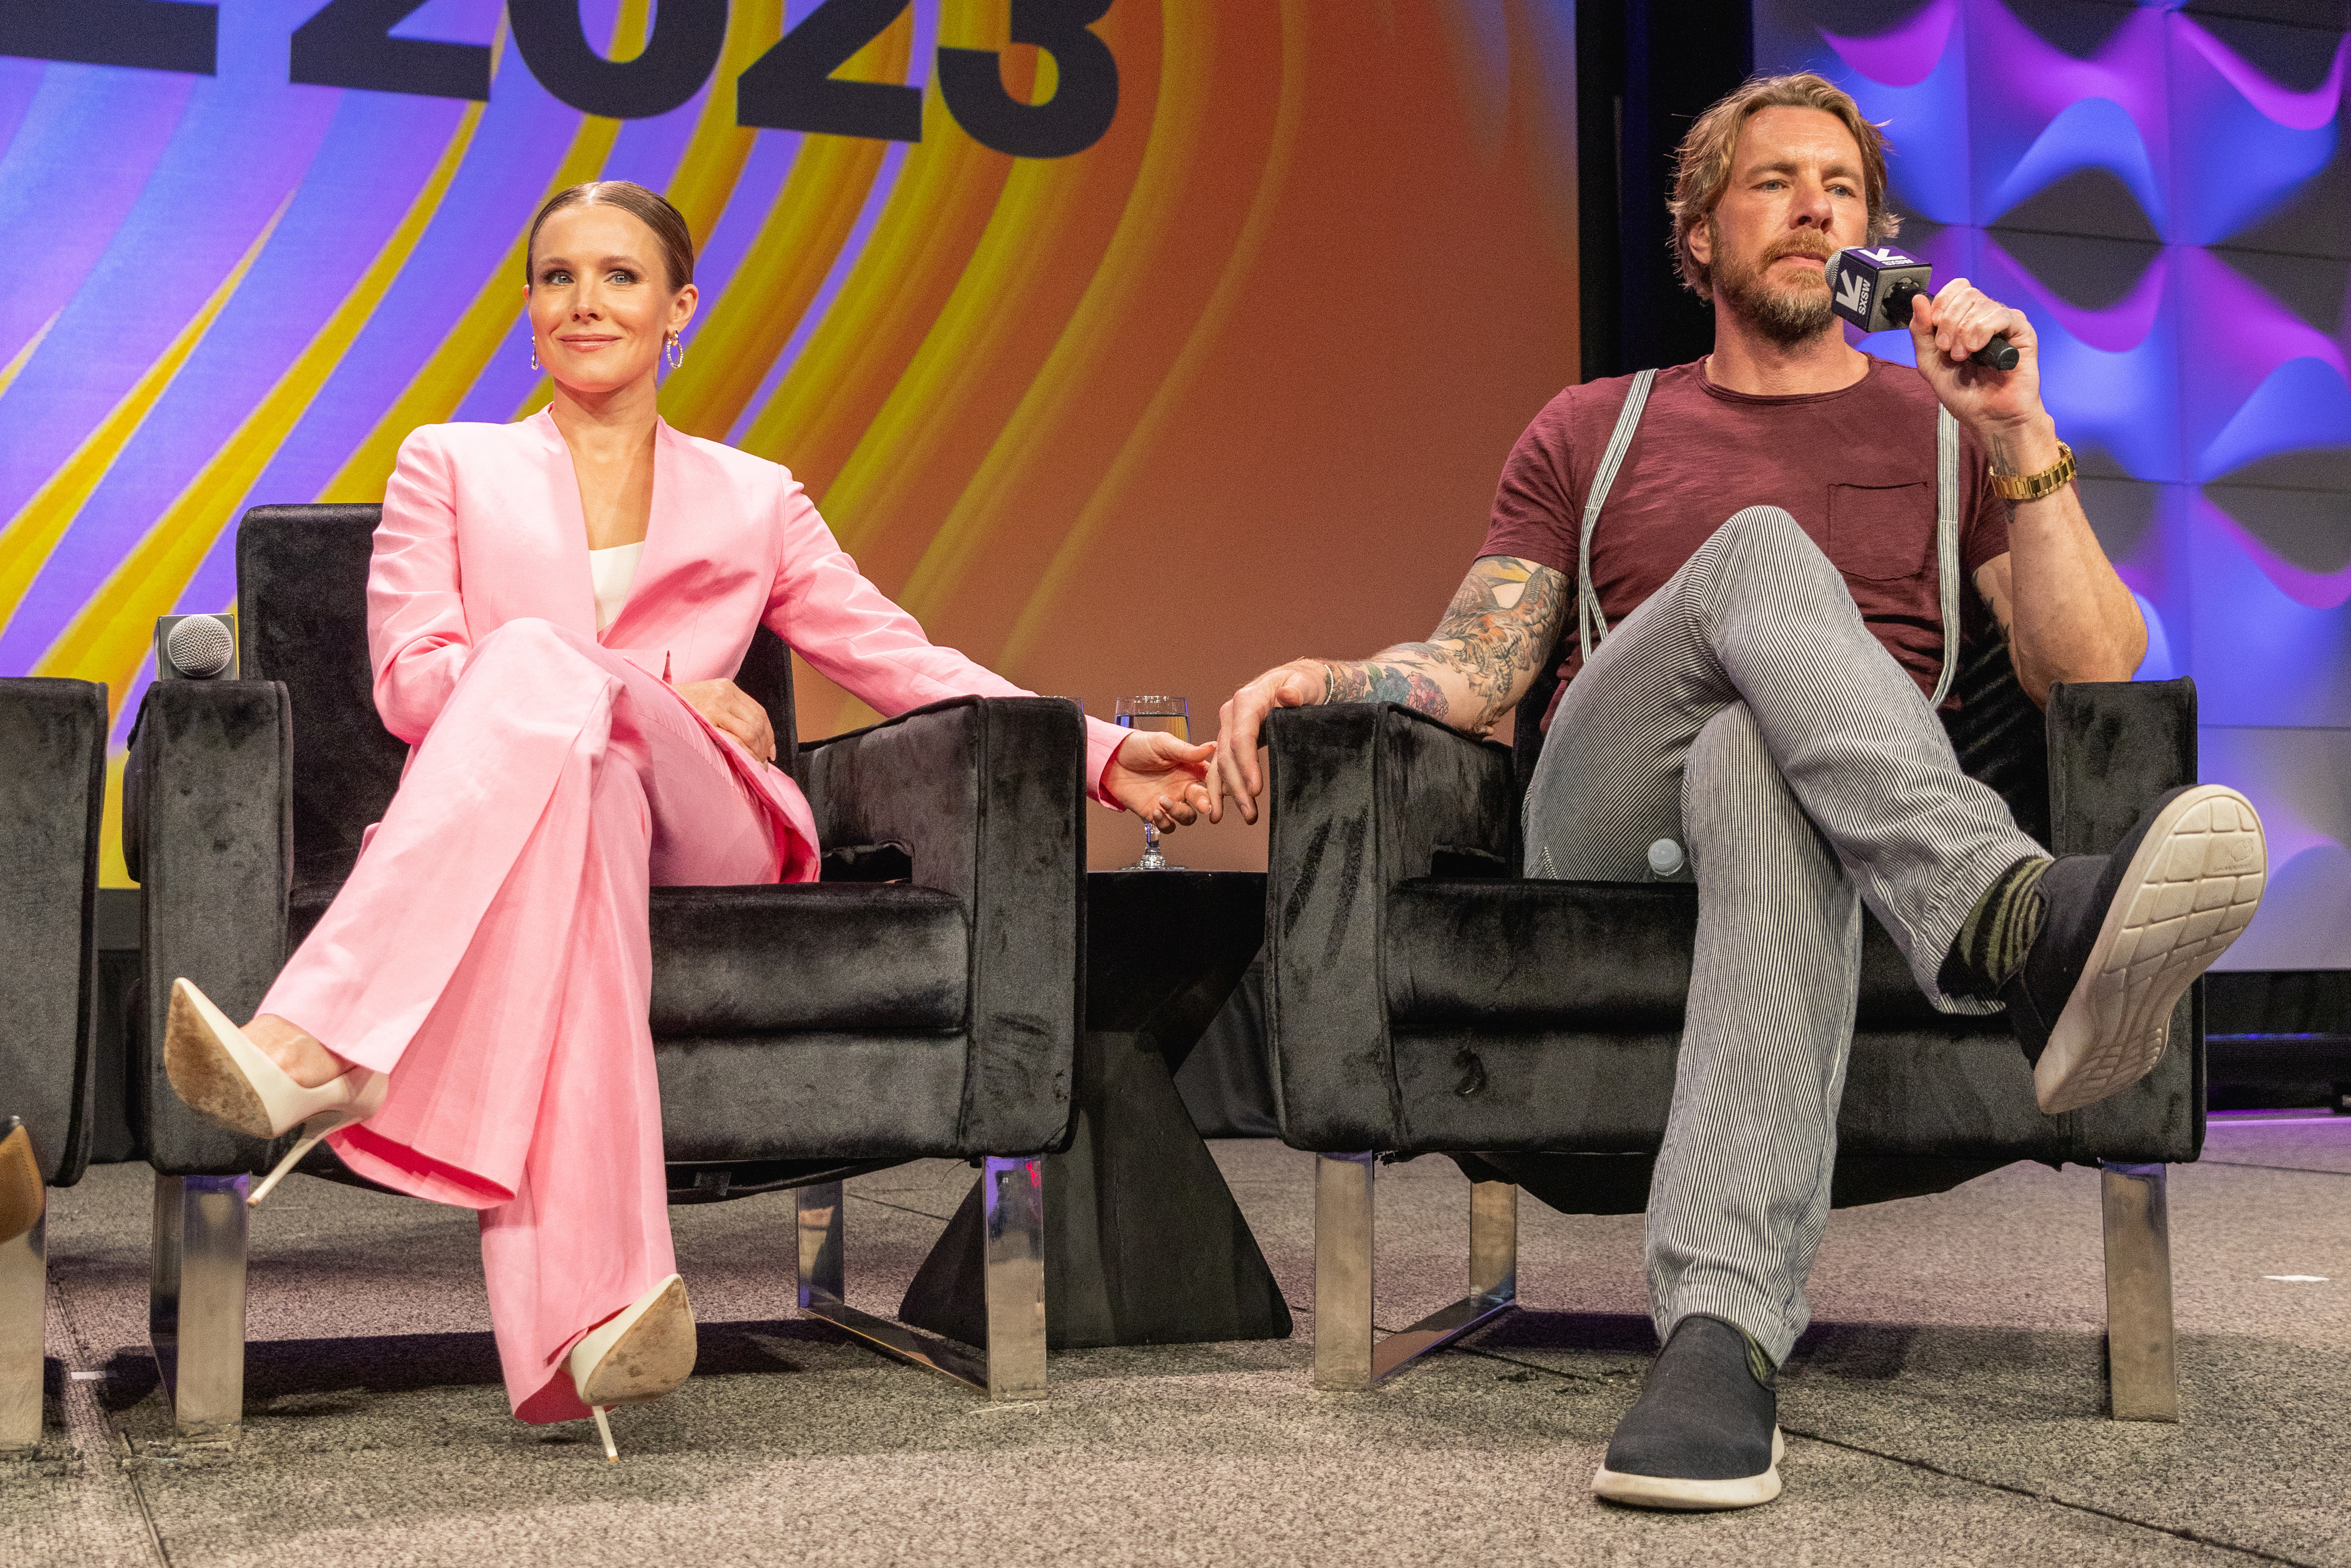 Kristen Bell and Dax Shepard sitting on stage during an interview